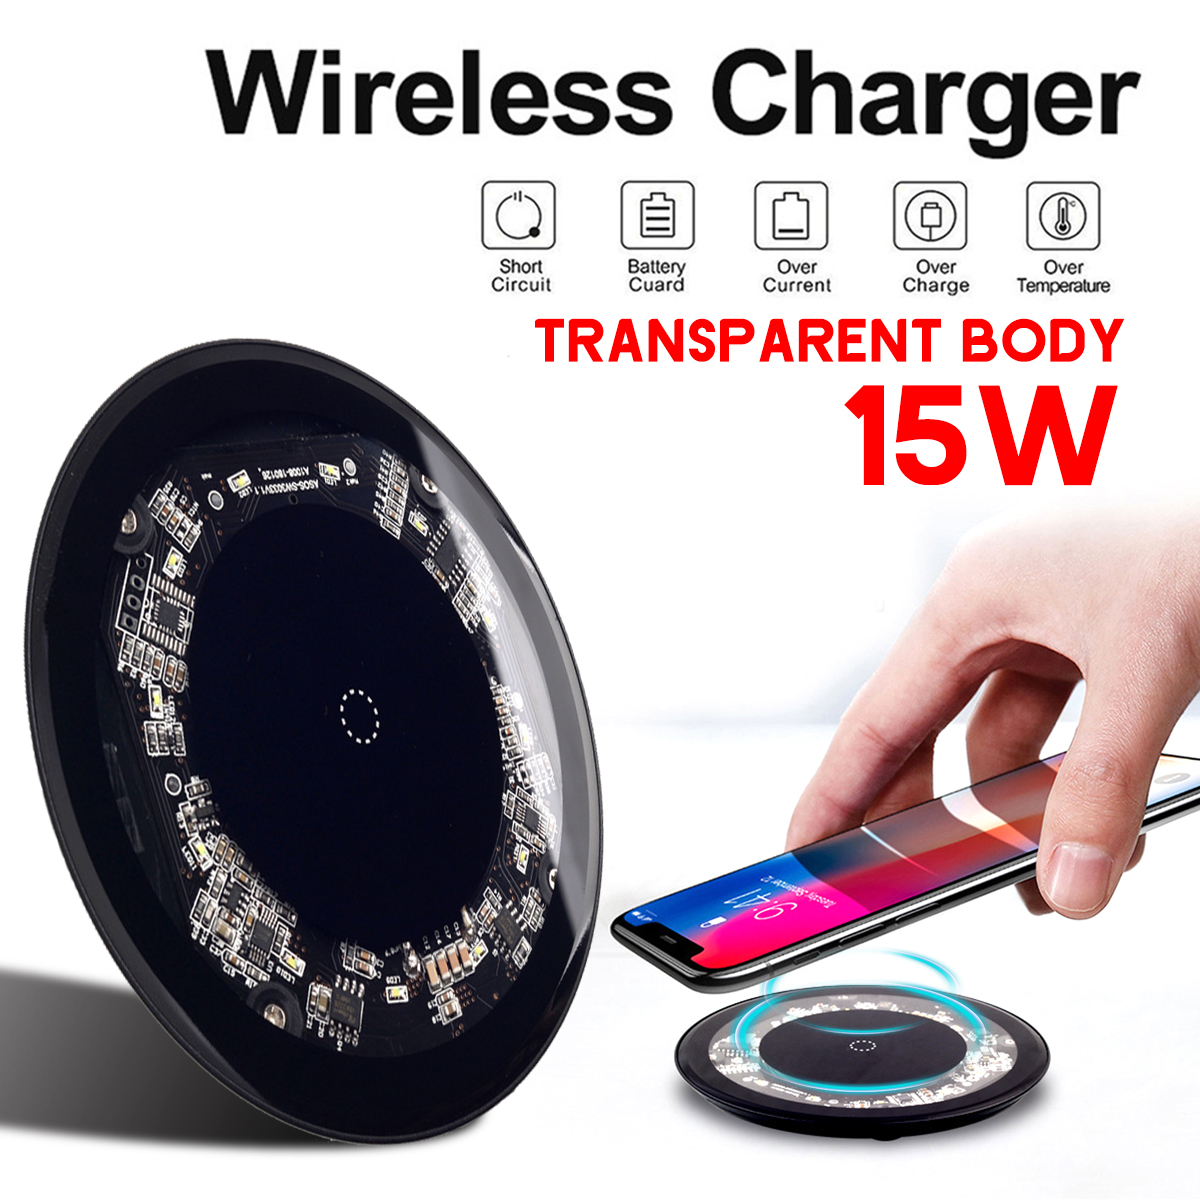 Bakeey-15W-Transparent-Smart-Induction-Quick-Charge-Wireless-Charger-for-iPhone-11-Pro-Max-for-Samsu-1646160-1